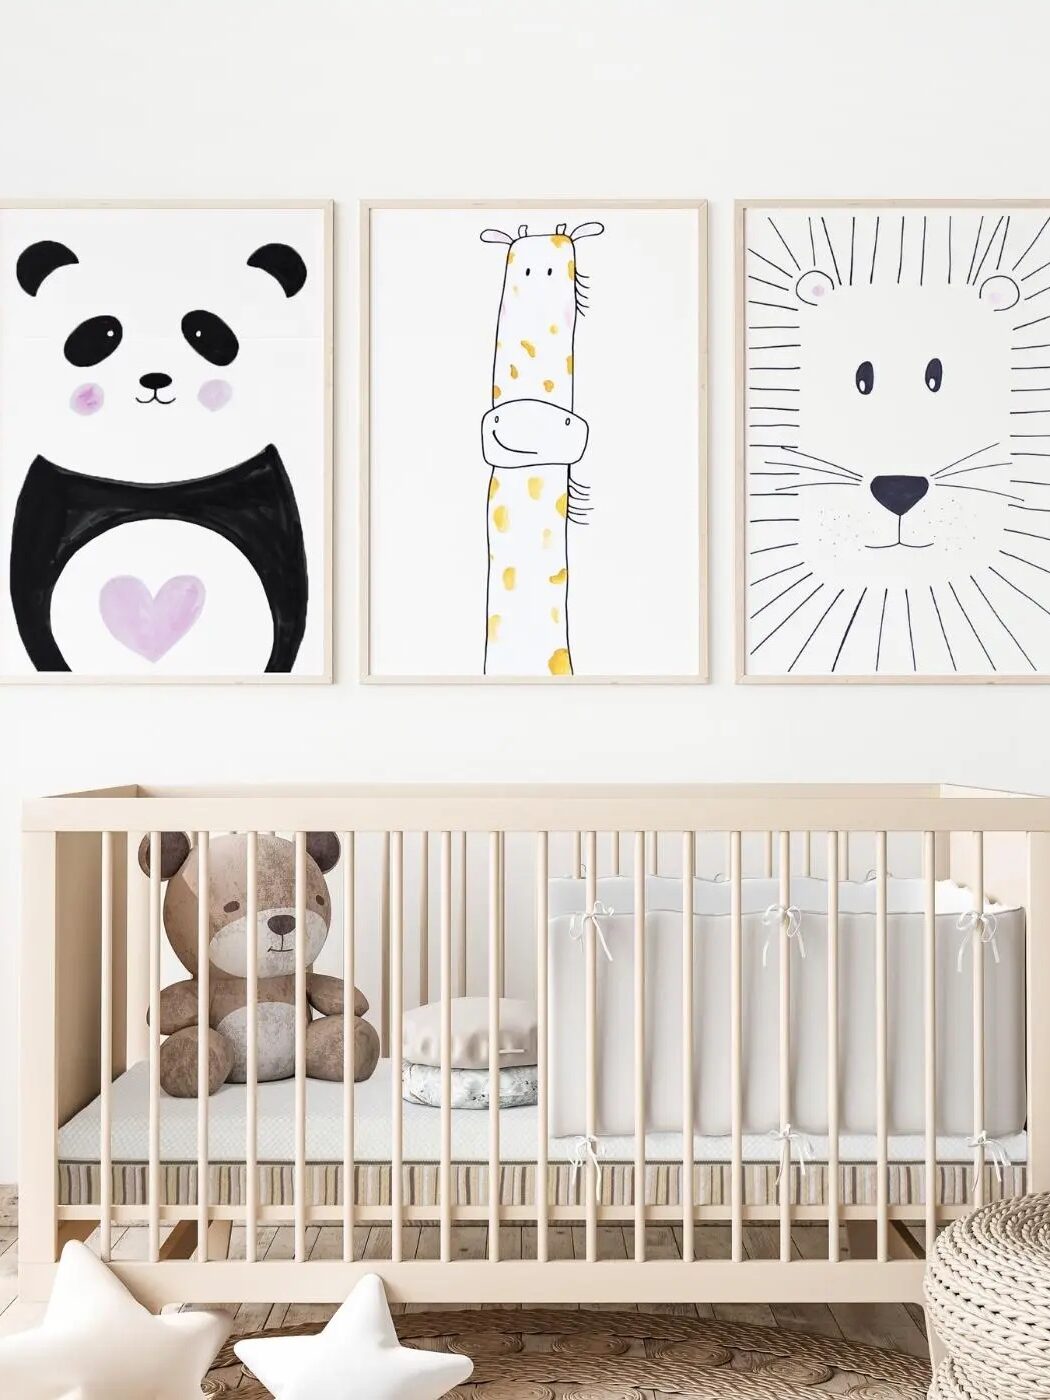 A crib with toys and framed animal illustrations above it.